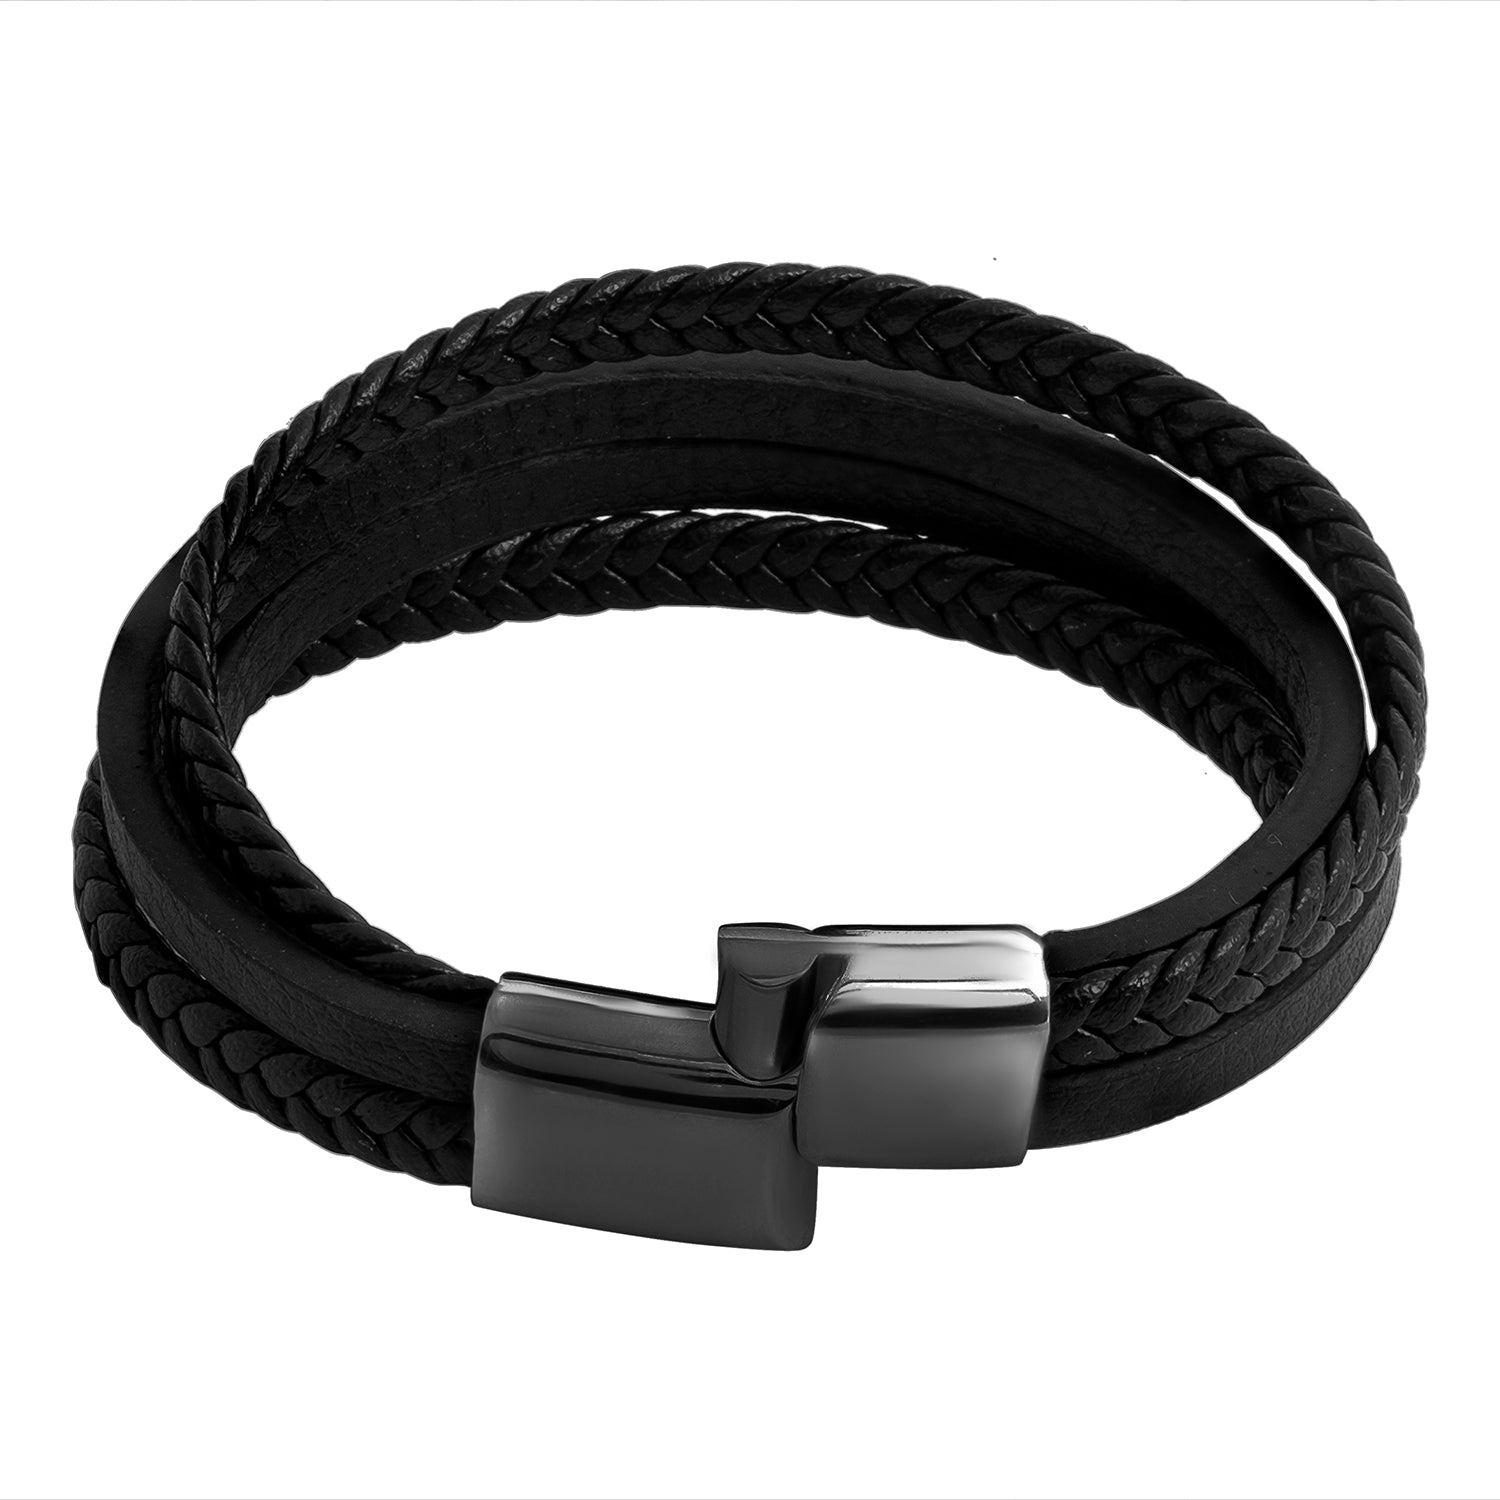 Buy Shining Jewel Braided Design Stainless Steel and Multilayer Leather  Bracelet for Men, Boys (SJ_3561_BK) at Amazon.in